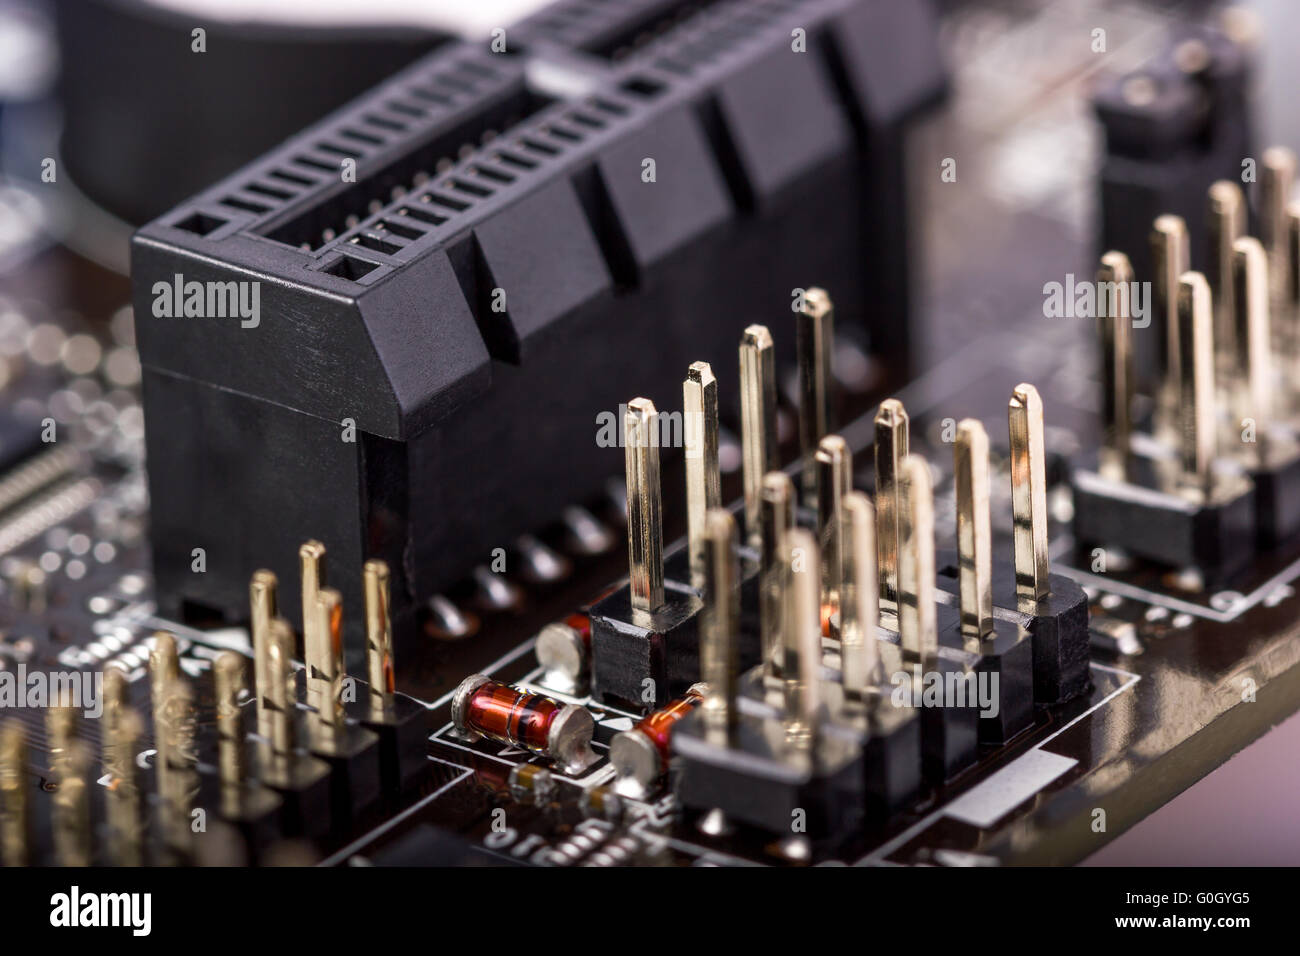 Electronic collection - closeup of computer circuit board with radioelements Stock Photo